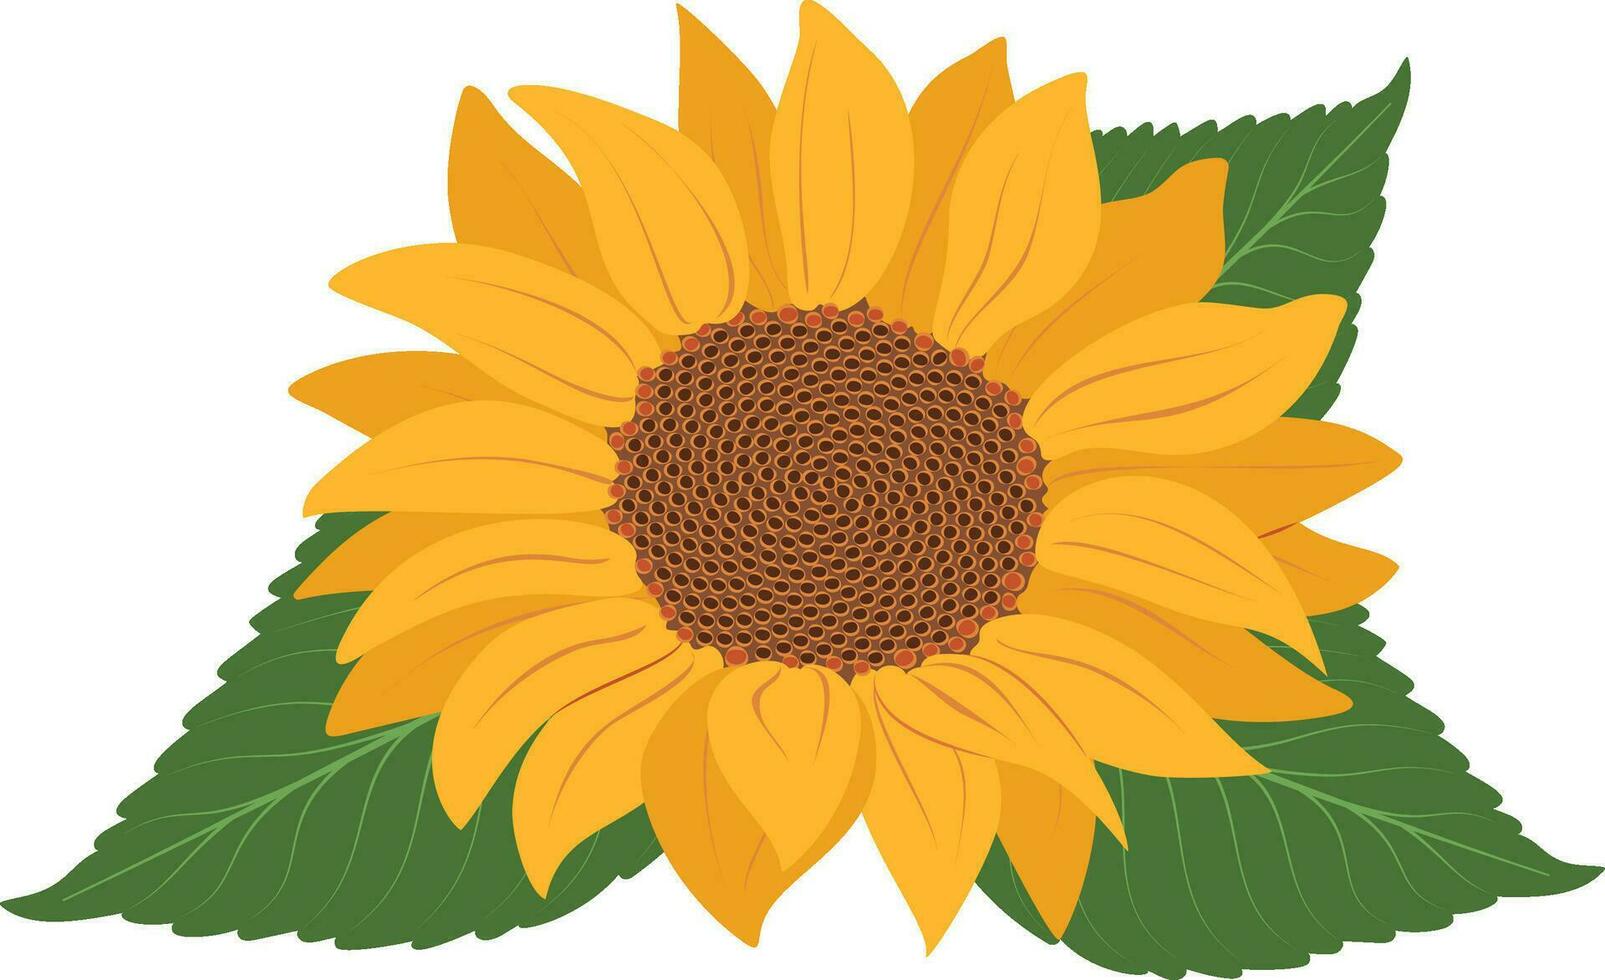 Sunflower icon isolated on Transparent background vector illustration. Cute hand drawn flower.